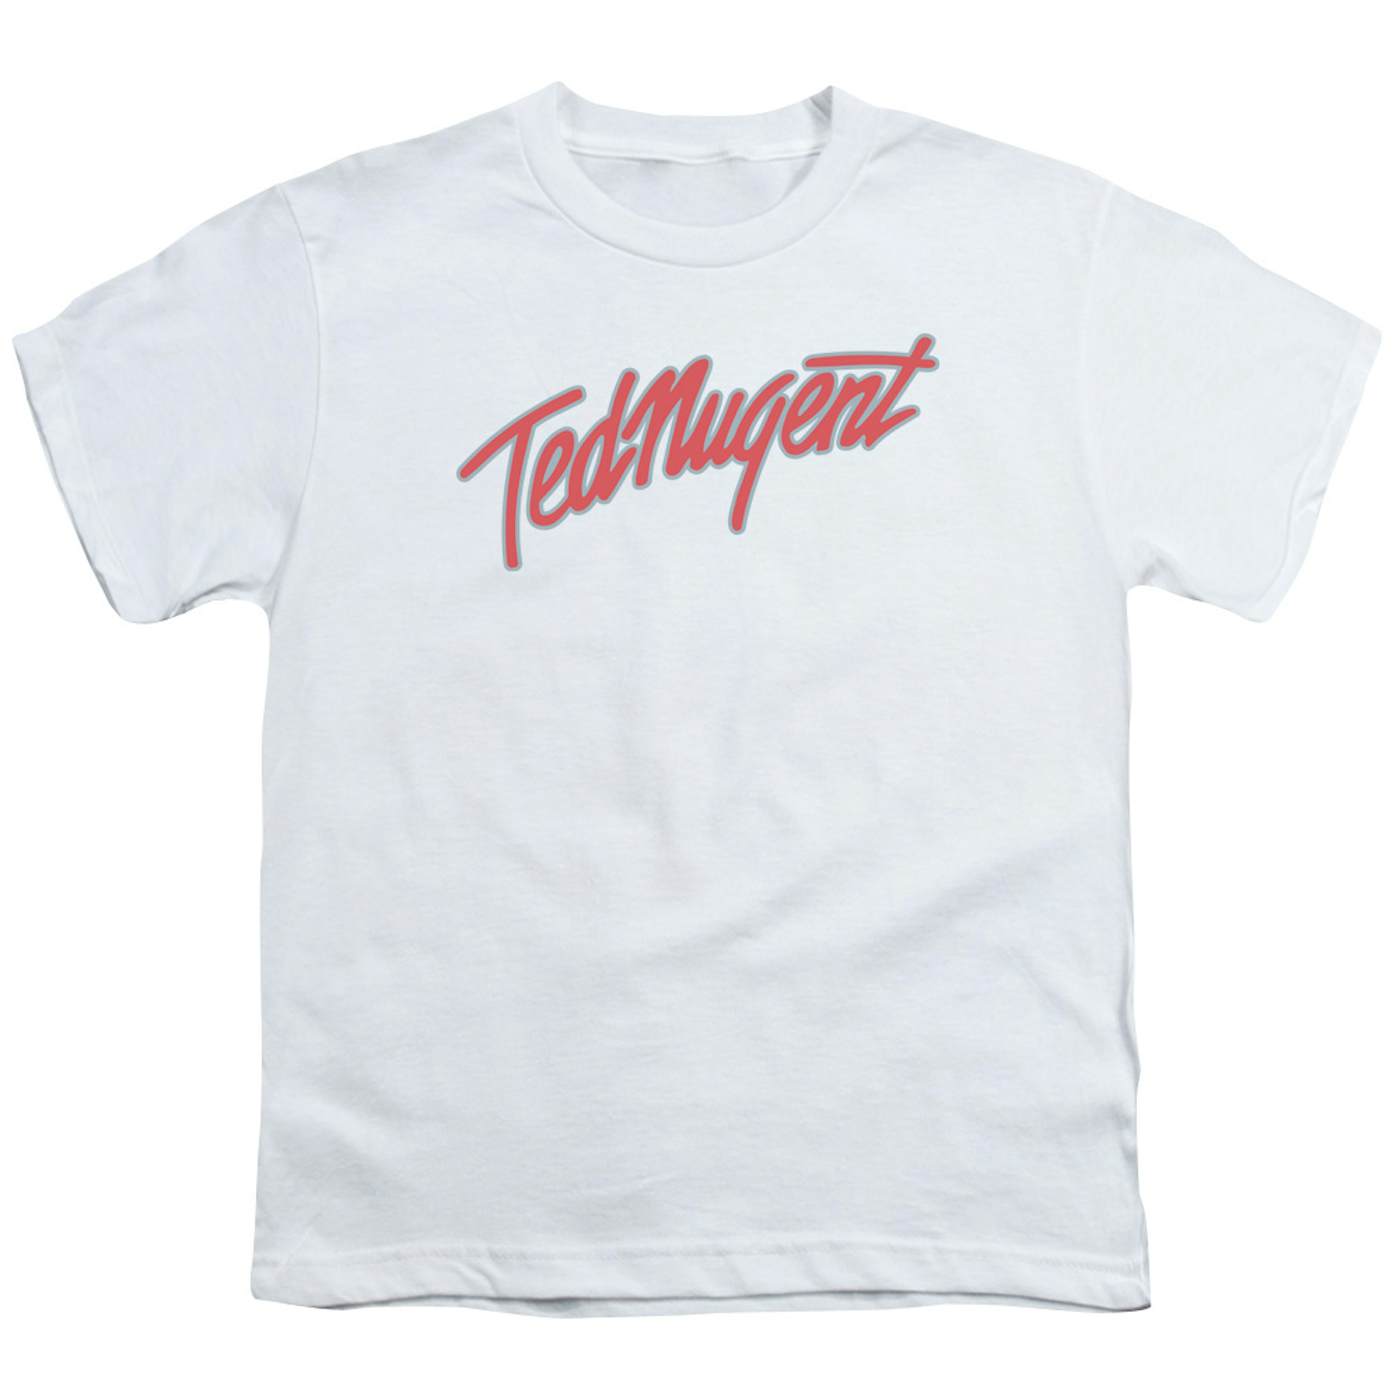 Ted Nugent Youth Tee | CLEAN LOGO Youth T Shirt